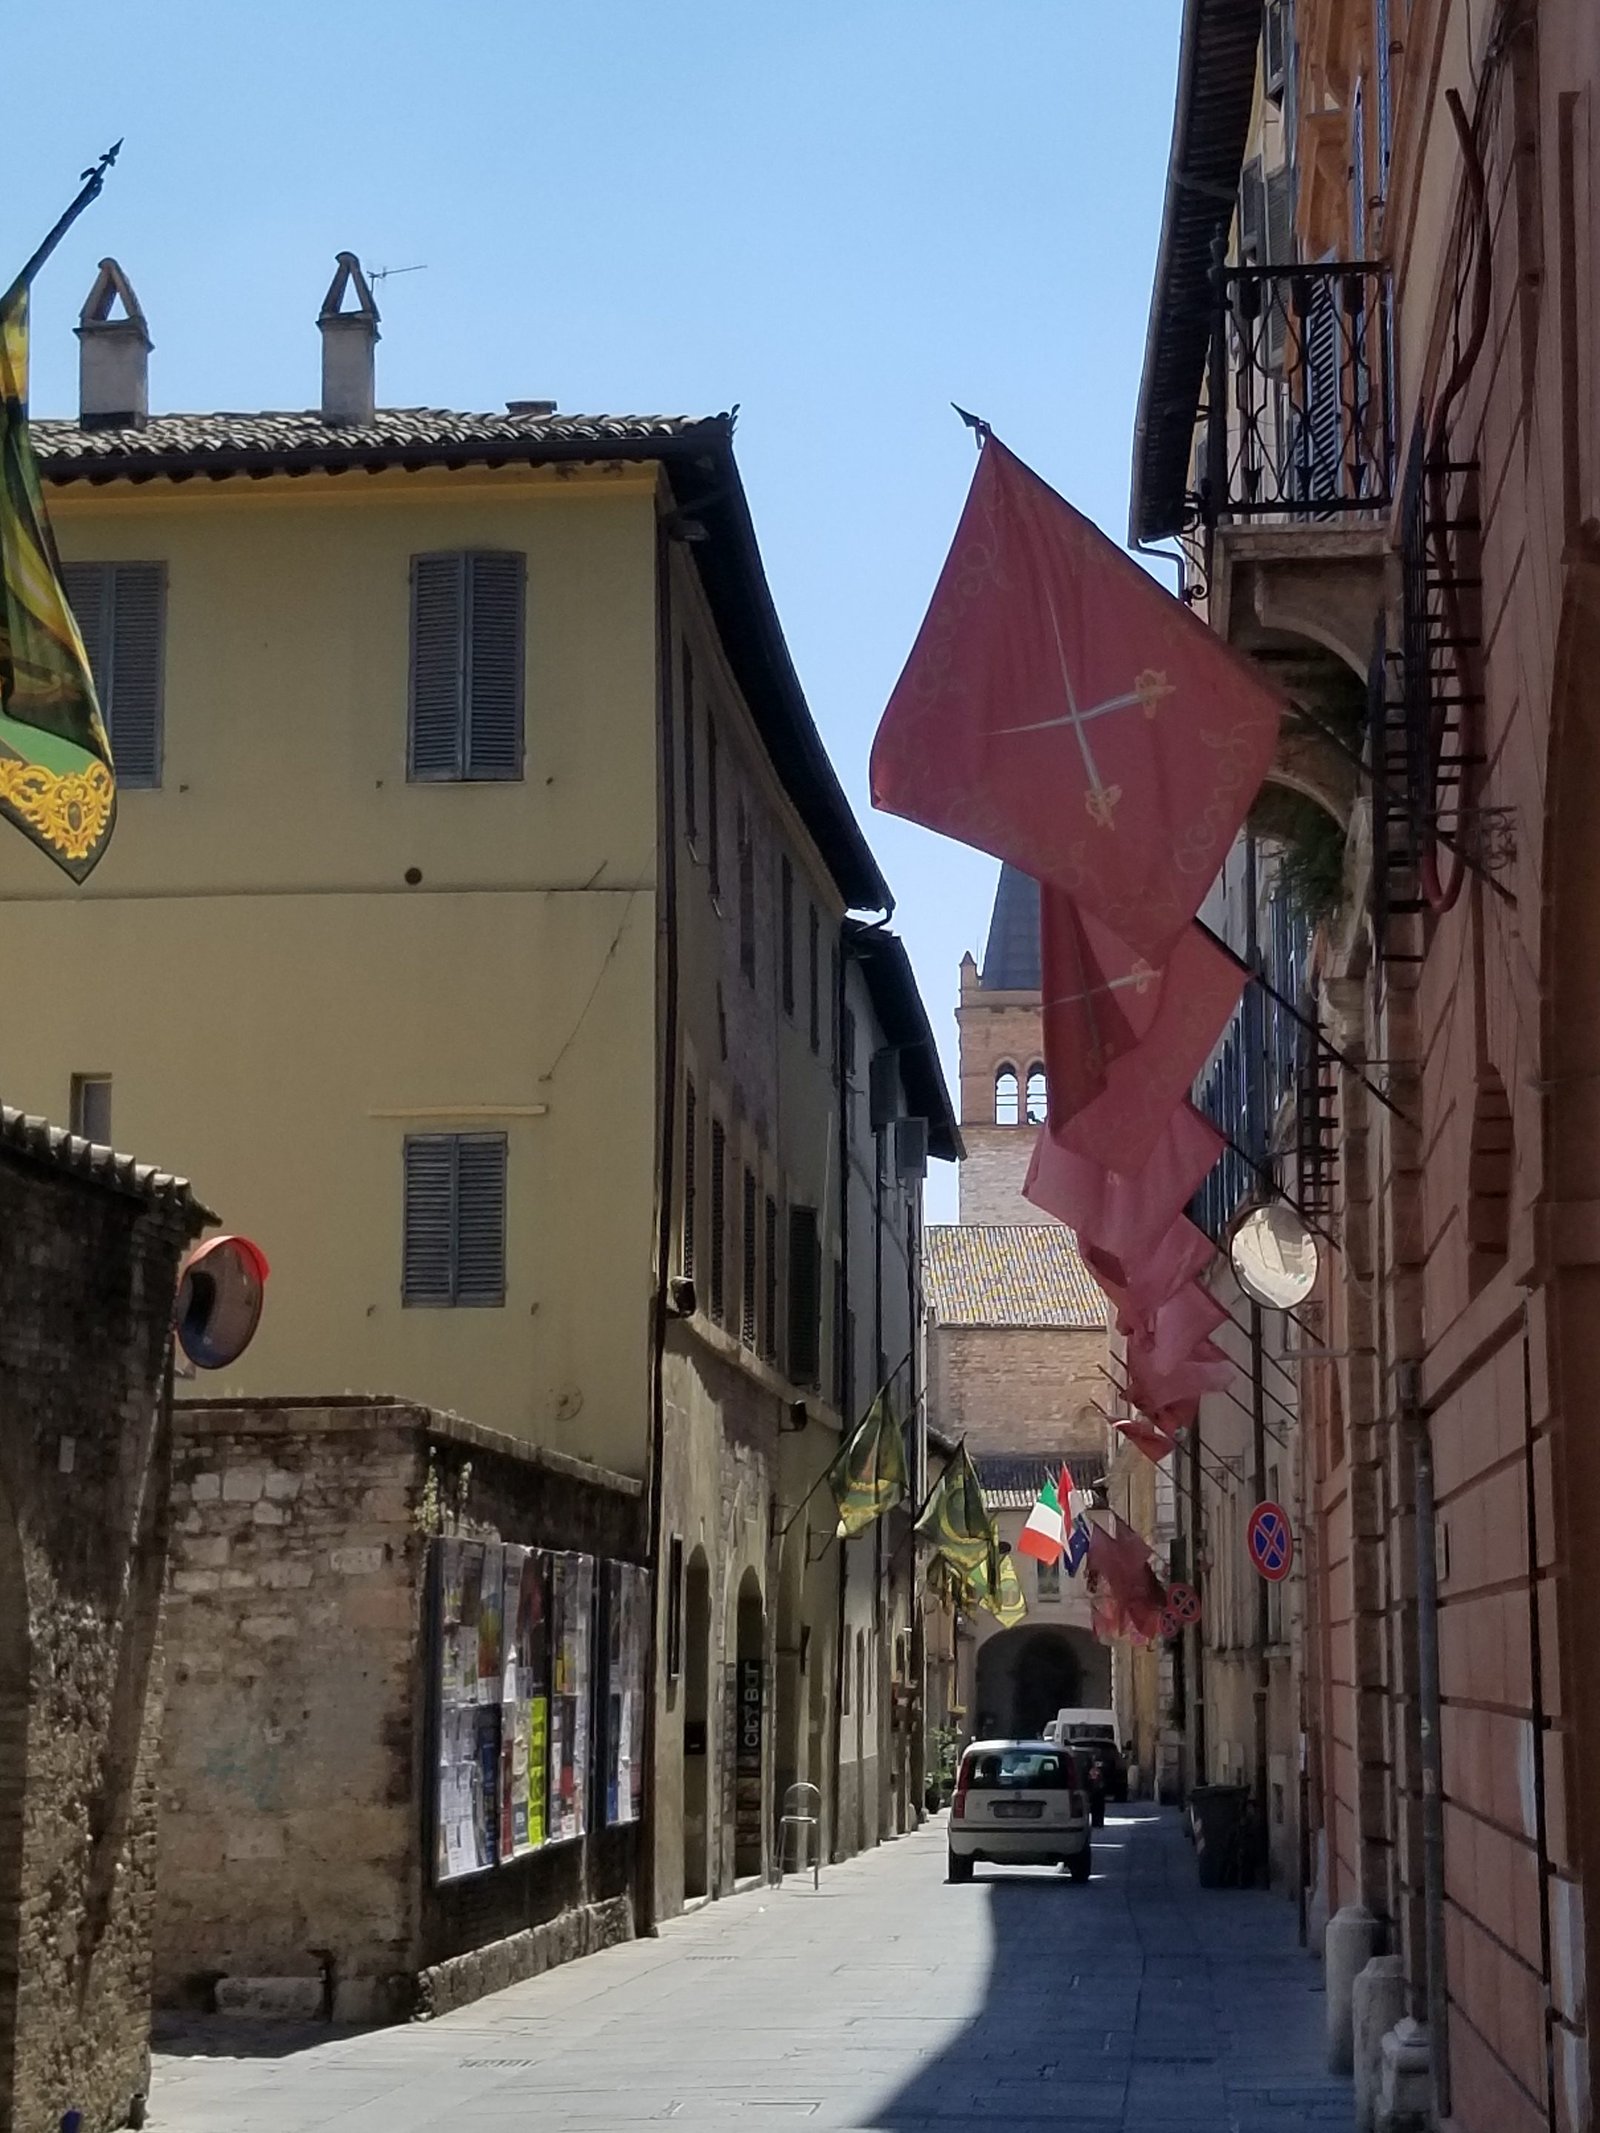 Foligno, Italy - A beautiful medieval town in Umbria. https://ouritalianjourney.com/foligno-italy-wonderful-month-in-umbria